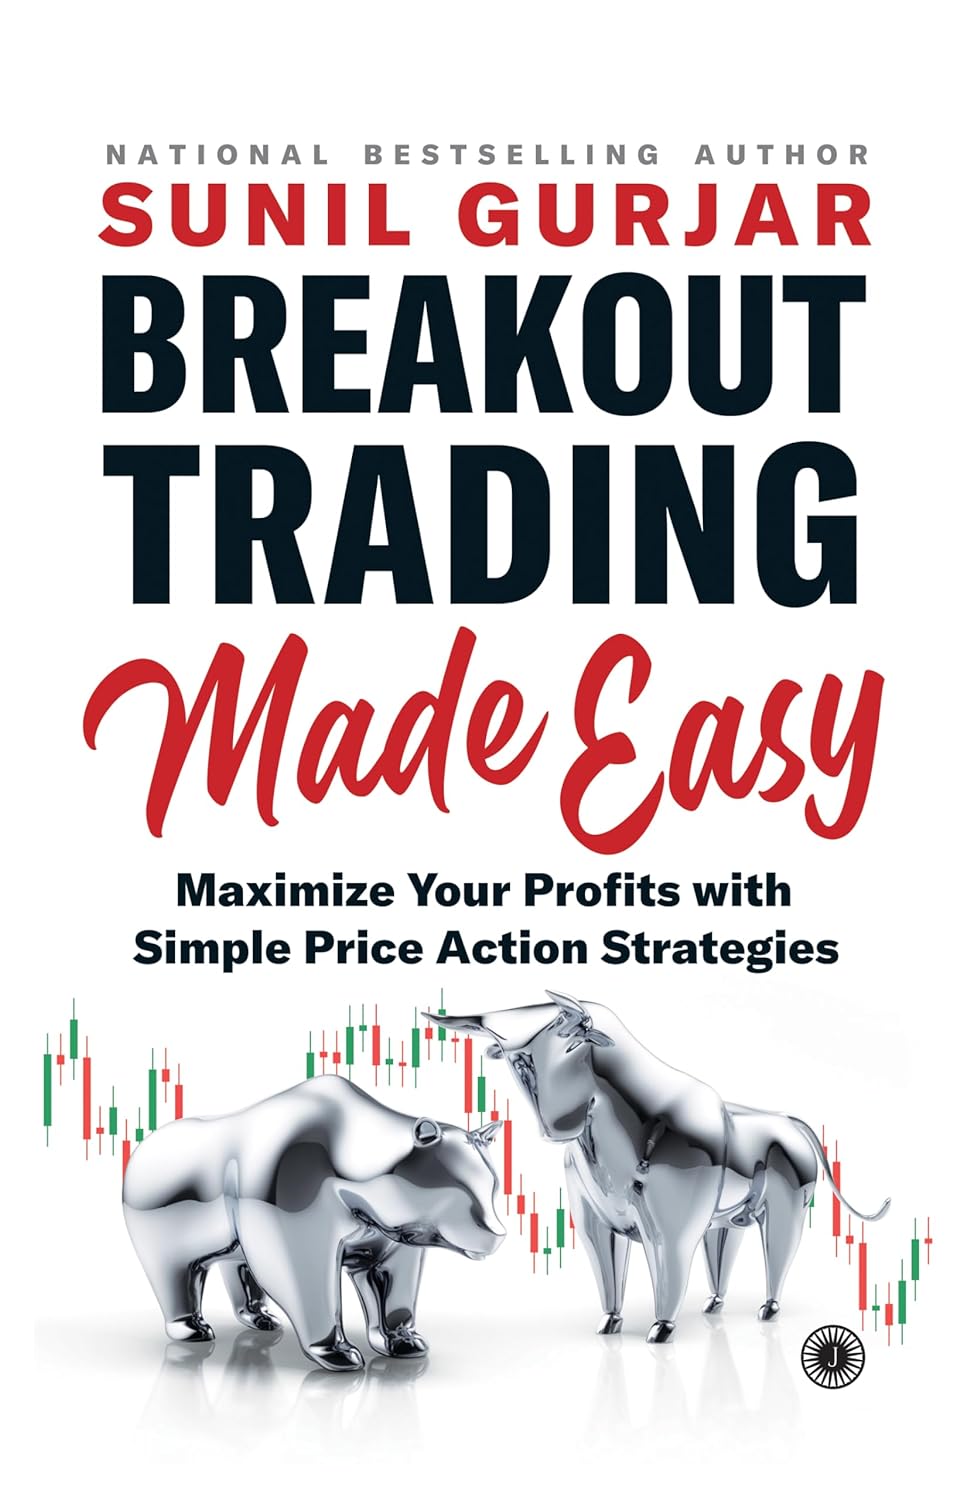 Breakout Trading Made Easy-Maximize Your Profits with Simple Price Action Strategies-Sunil Gurjar-Stumbit Business